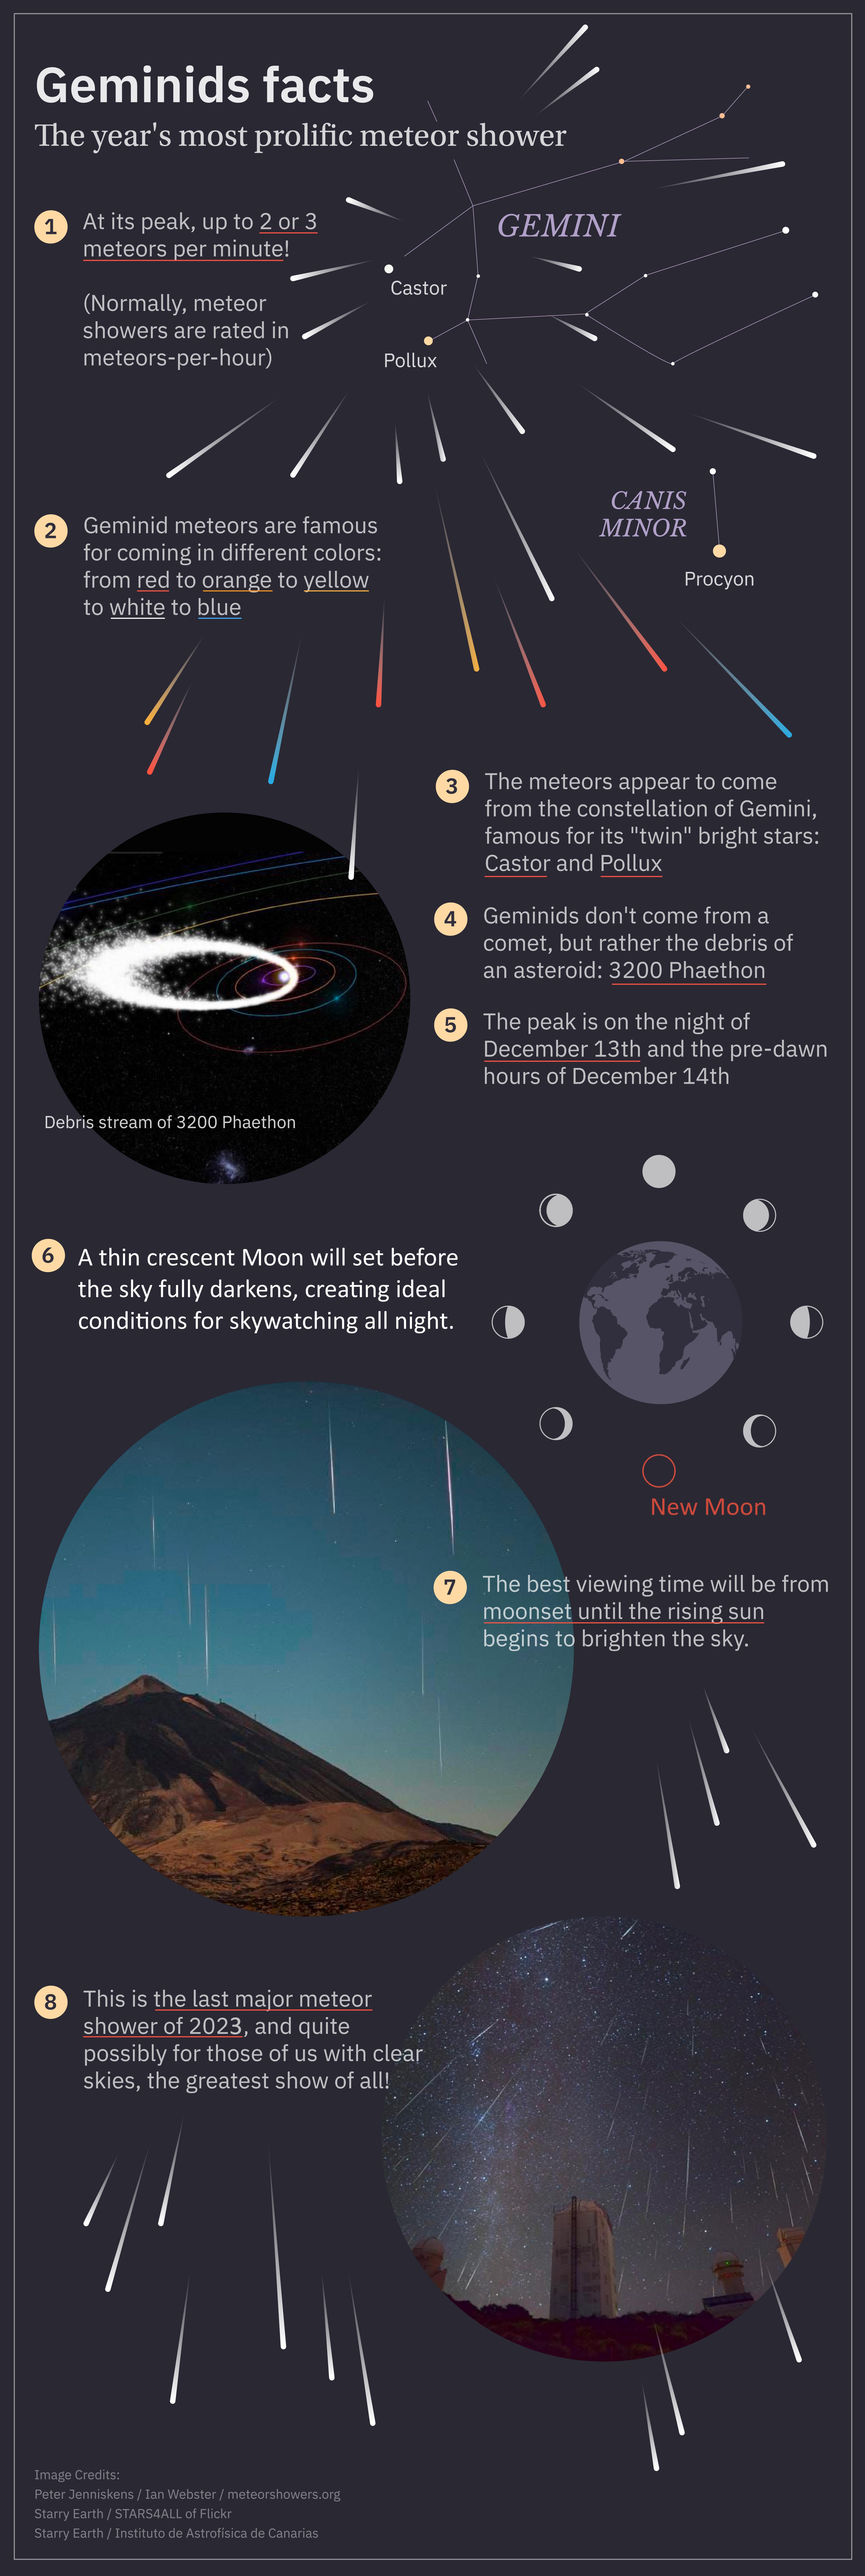 A poster showcasing the mesmerizing 2023 Geminids meteor shower.